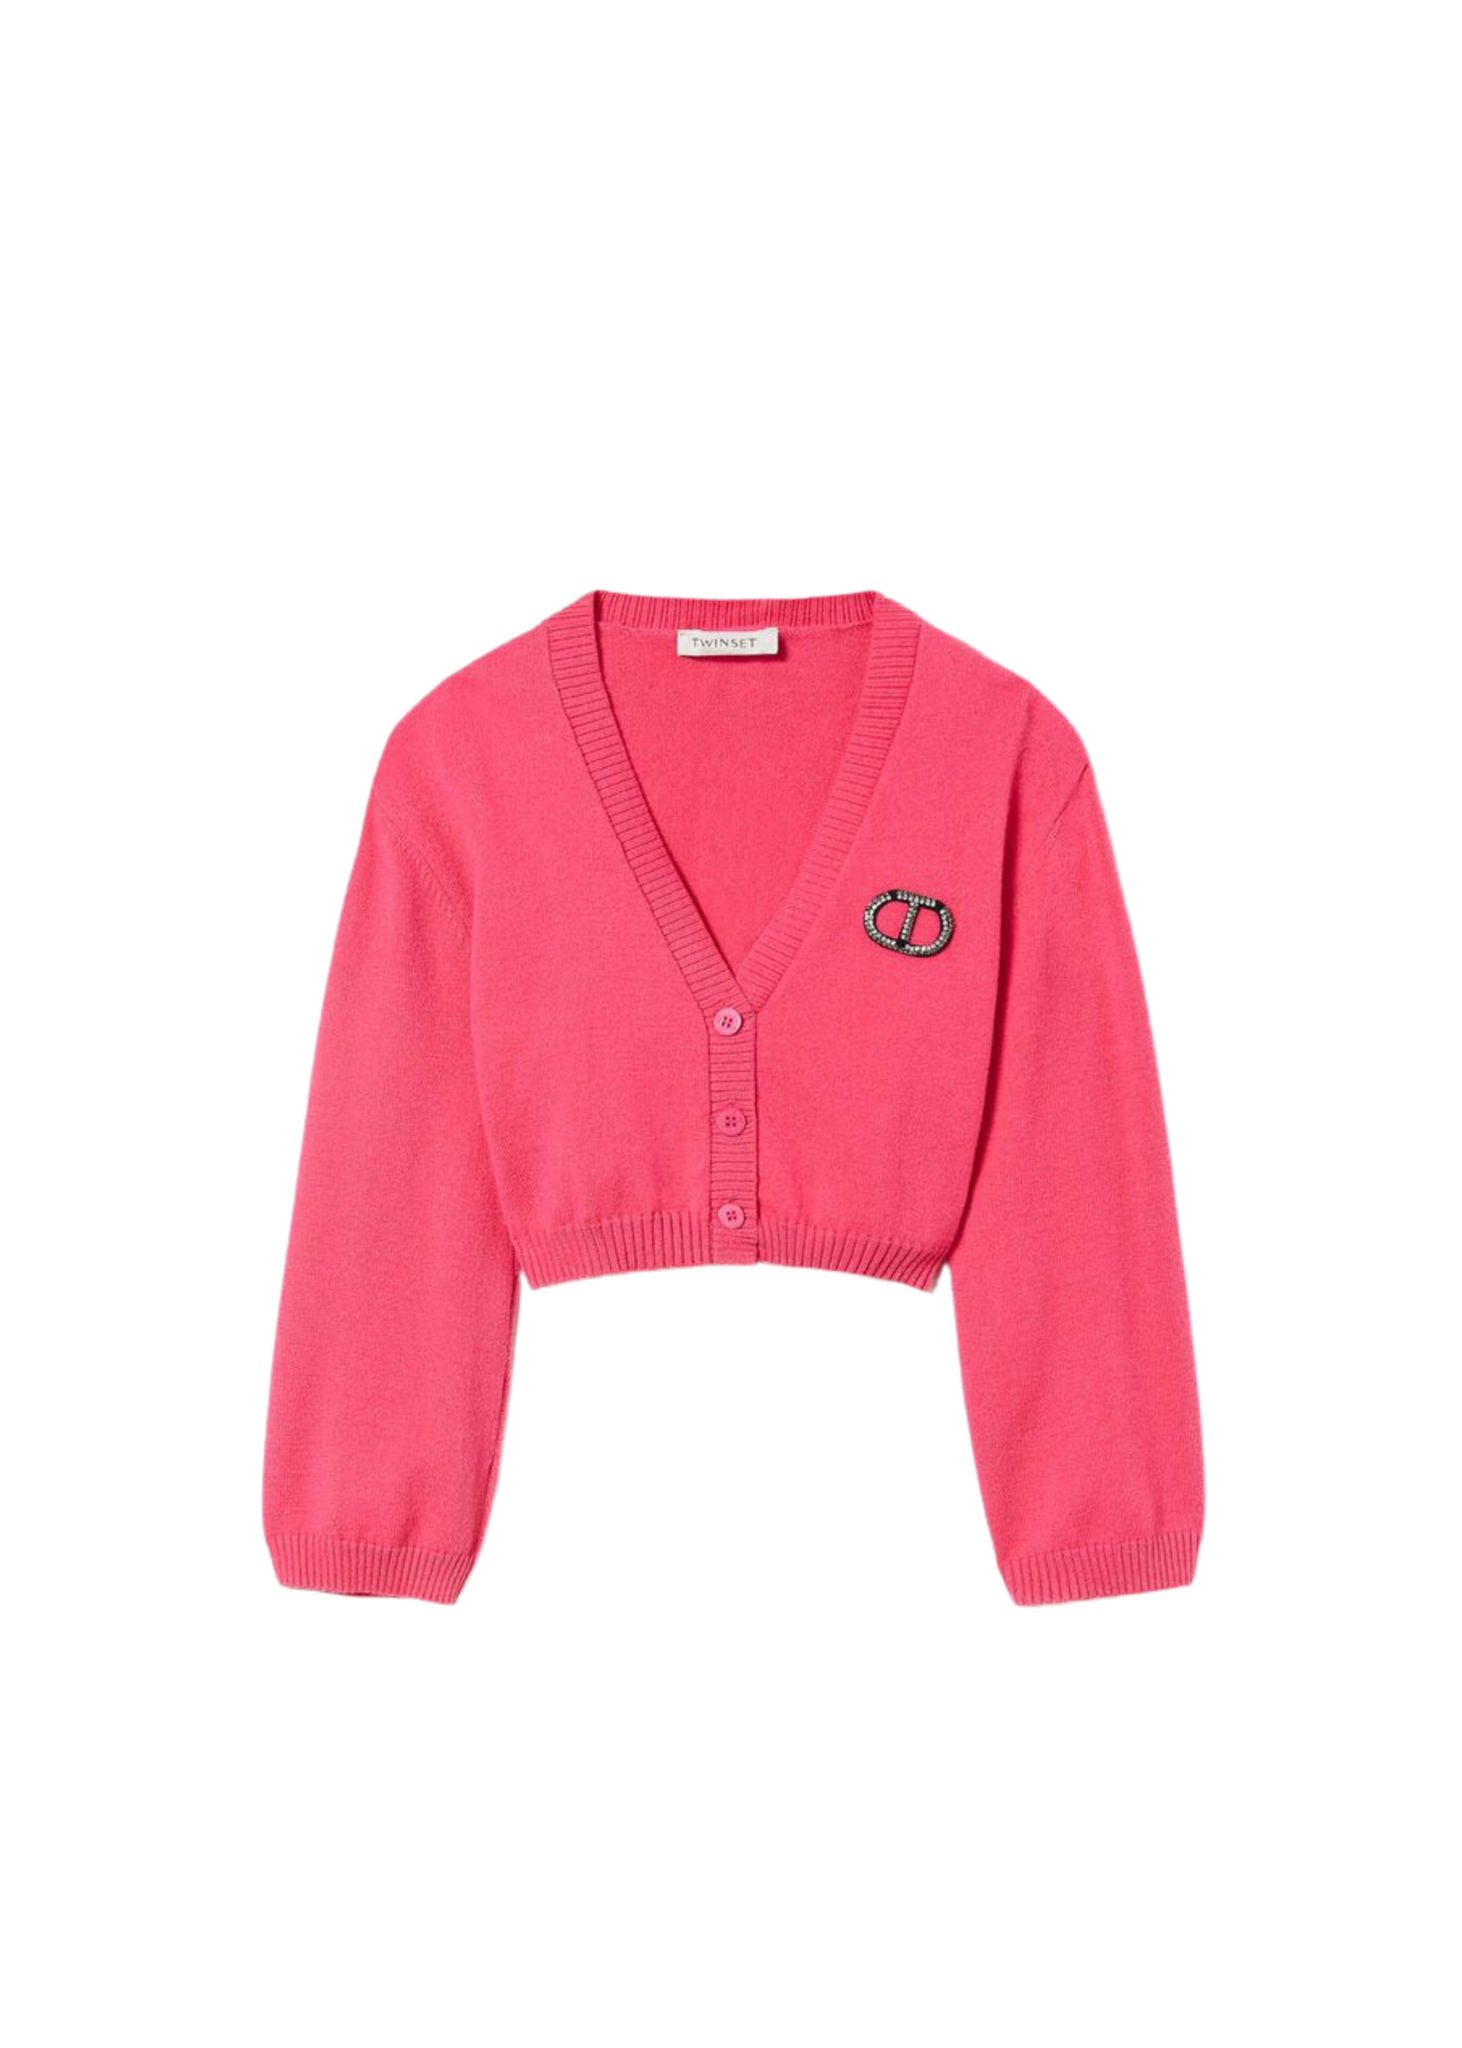 Featured image for “Twinset Cardigan con logo strass”